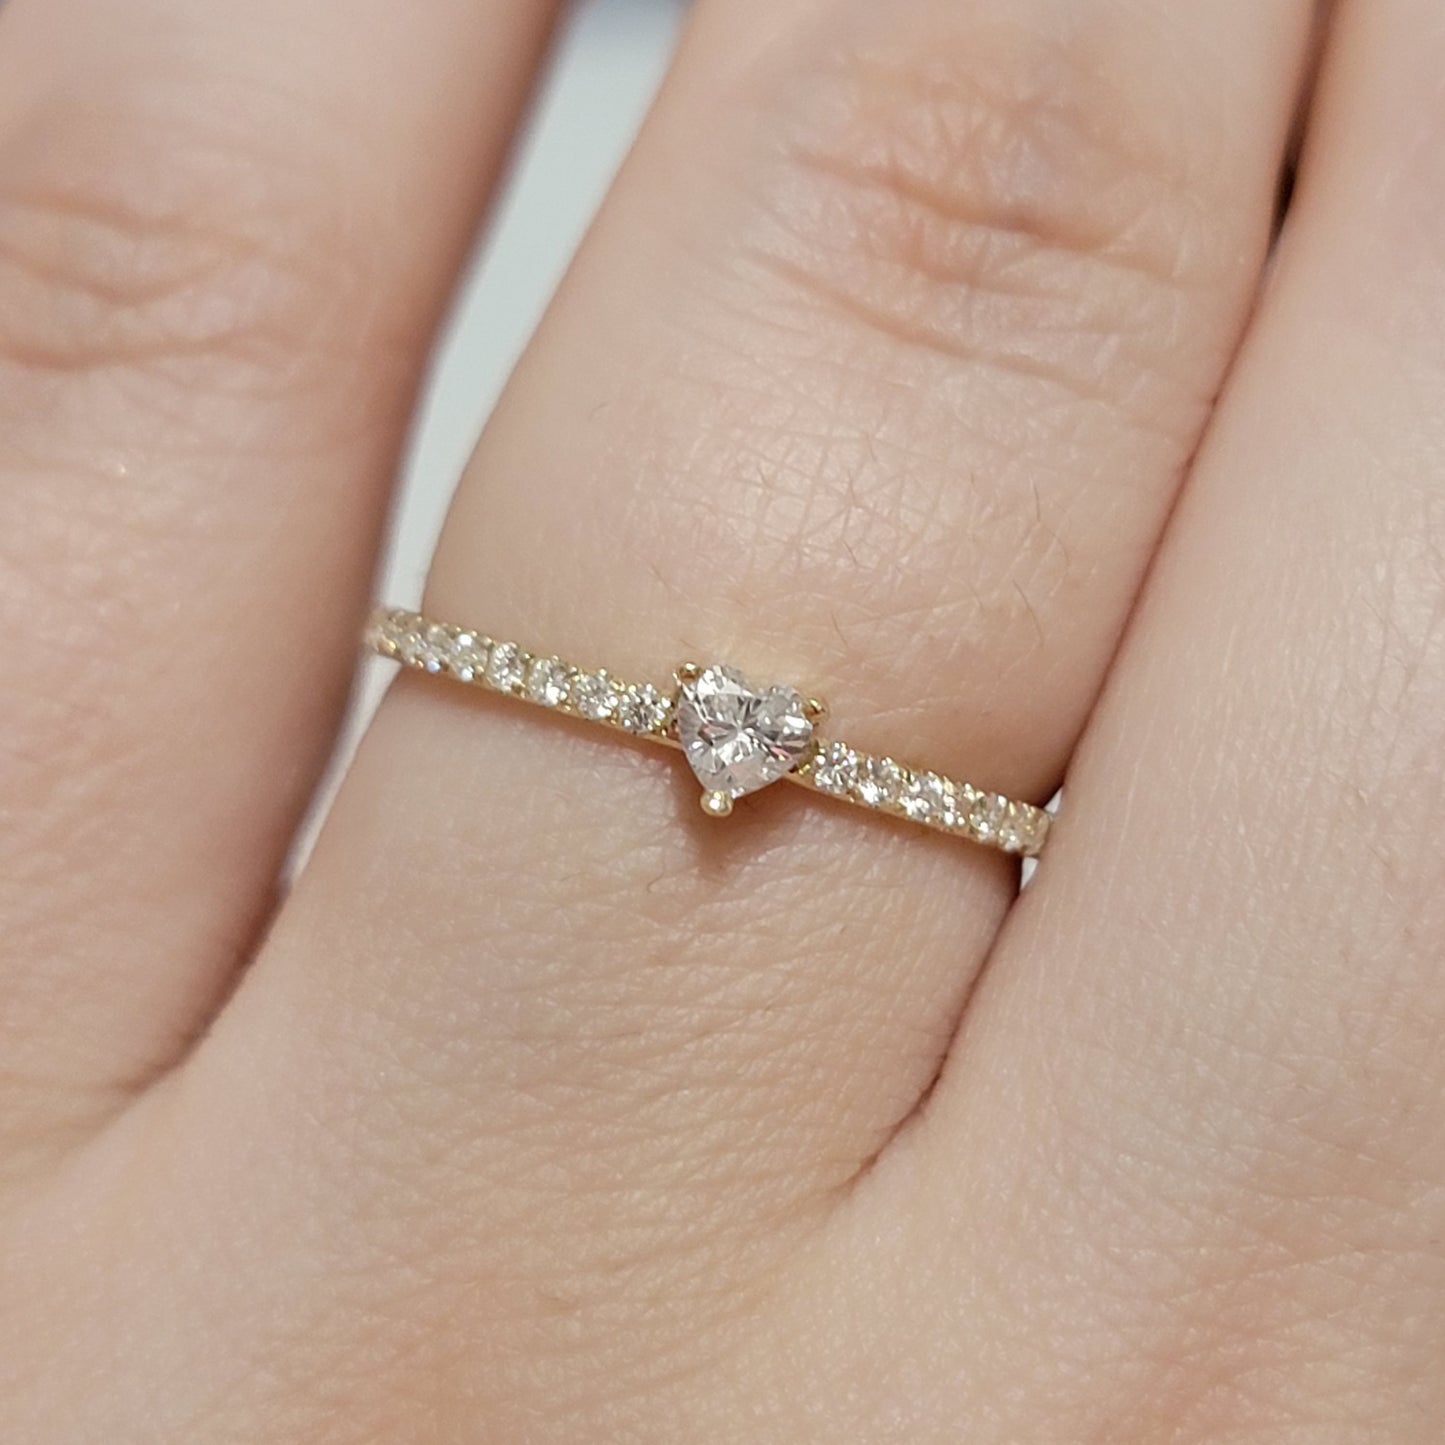 Diamond Ring, 14k Solid Gold Solitaire Ring, Dainty Diamond Ring, Diamond Engagement Ring, 0.16 Ct Heart Shape Cut Diamond Ring Set Gold